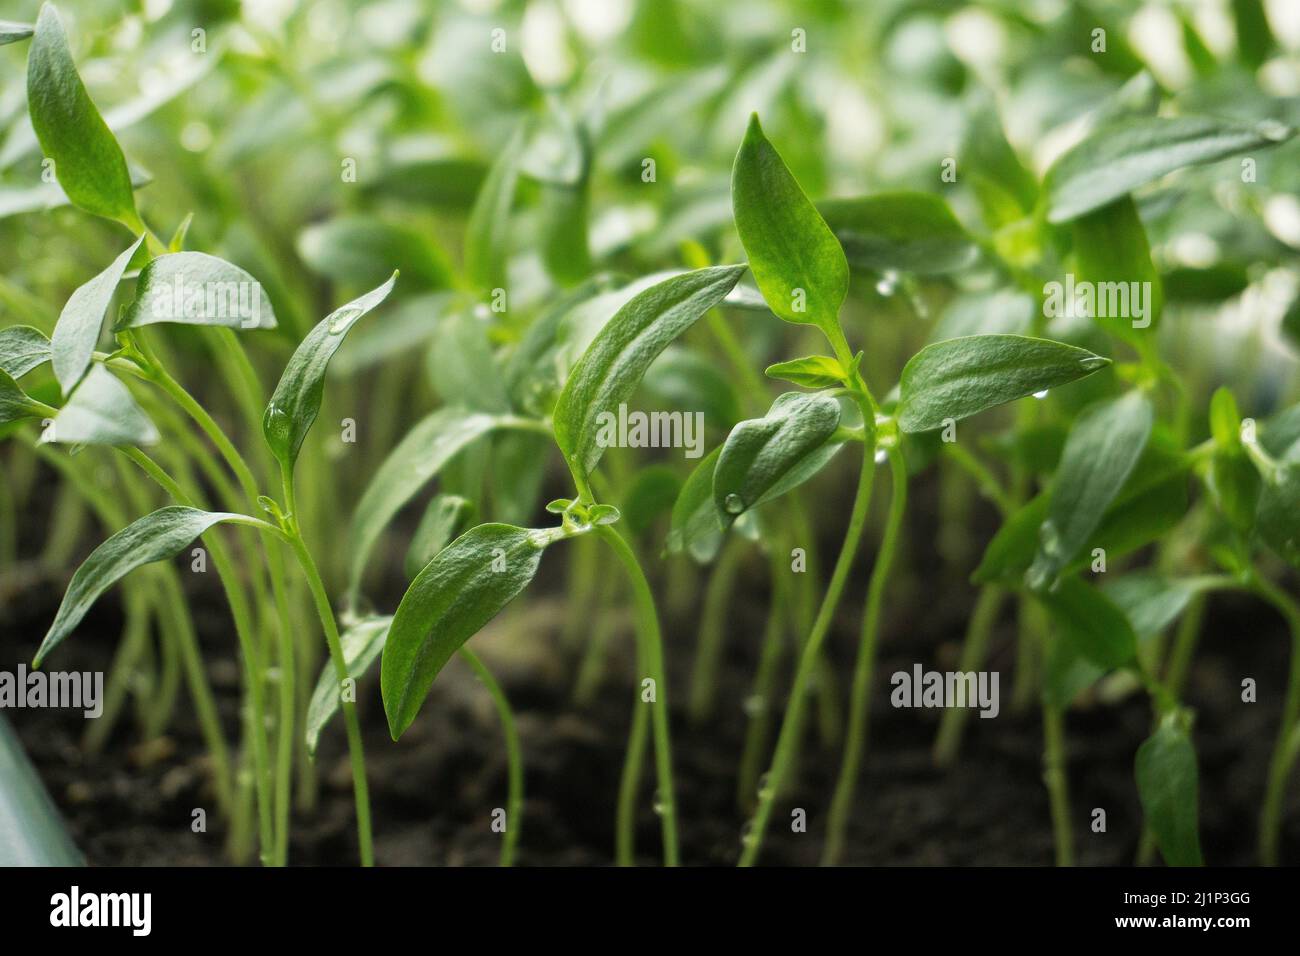 sprouted sprouts of bell pepper Stock Photo